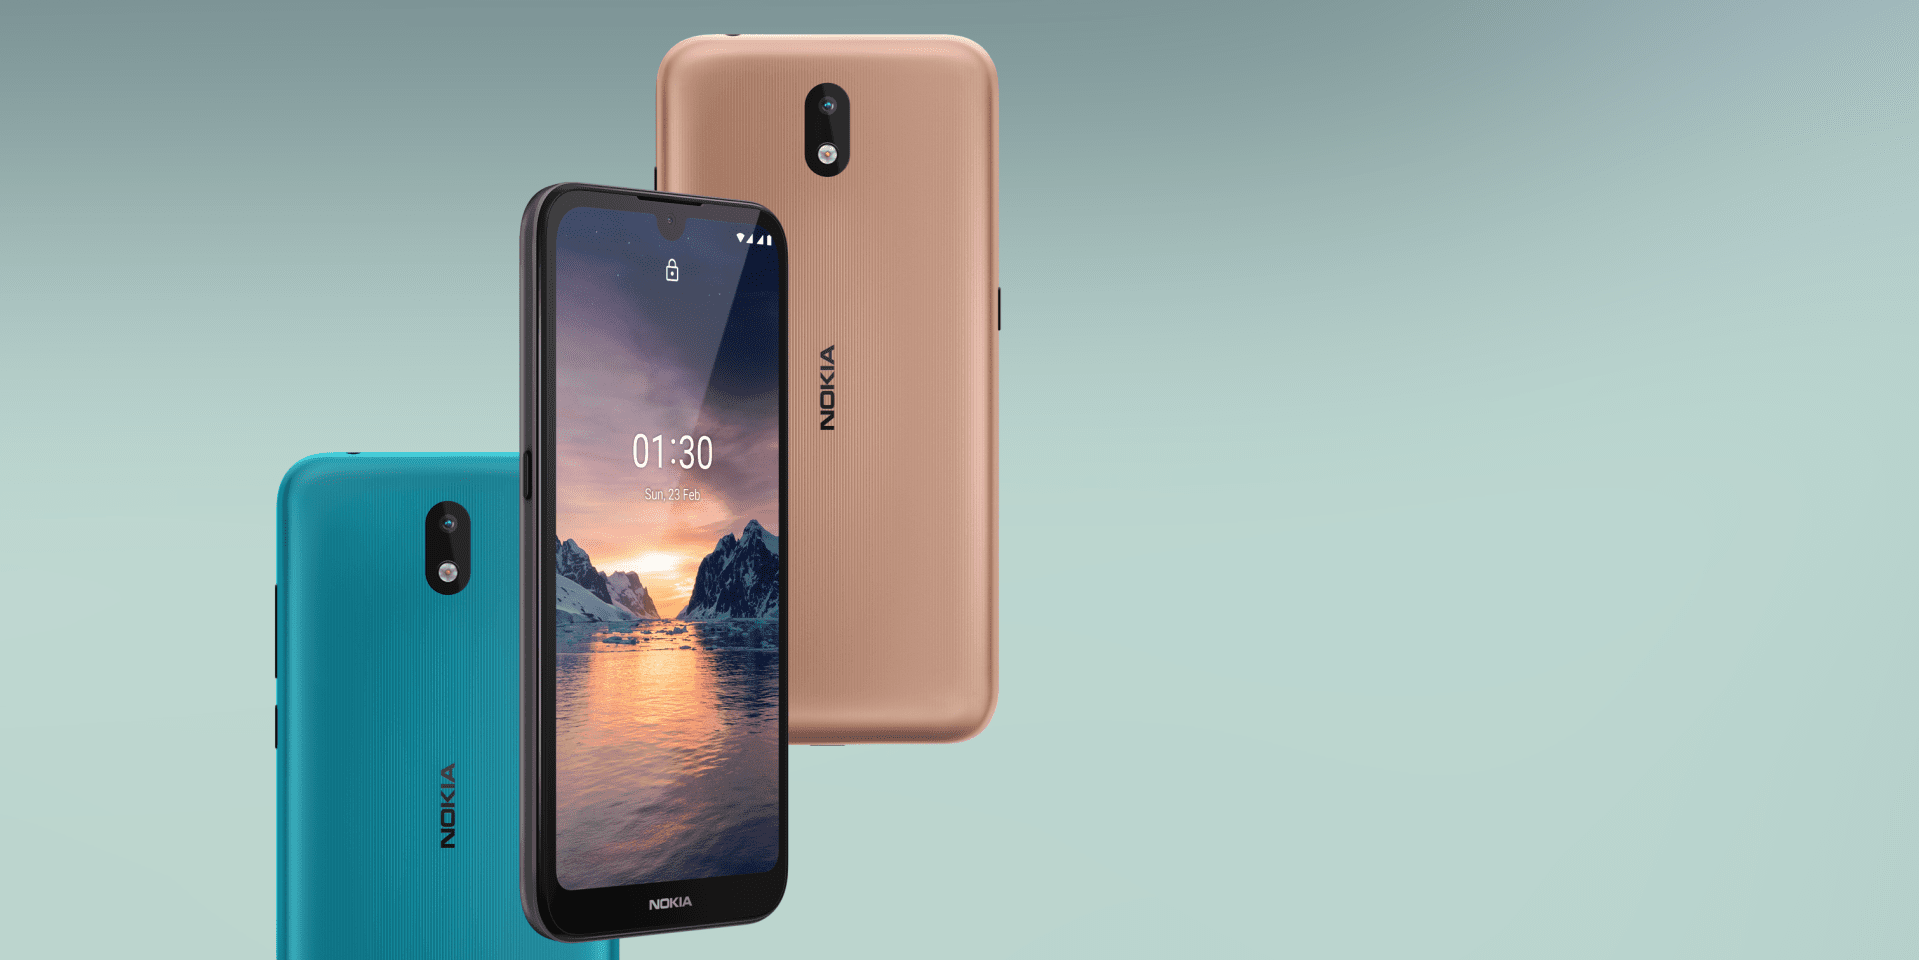 Nokia TA-1234 certified by WiFi Alliance. Brings Android 10 out of